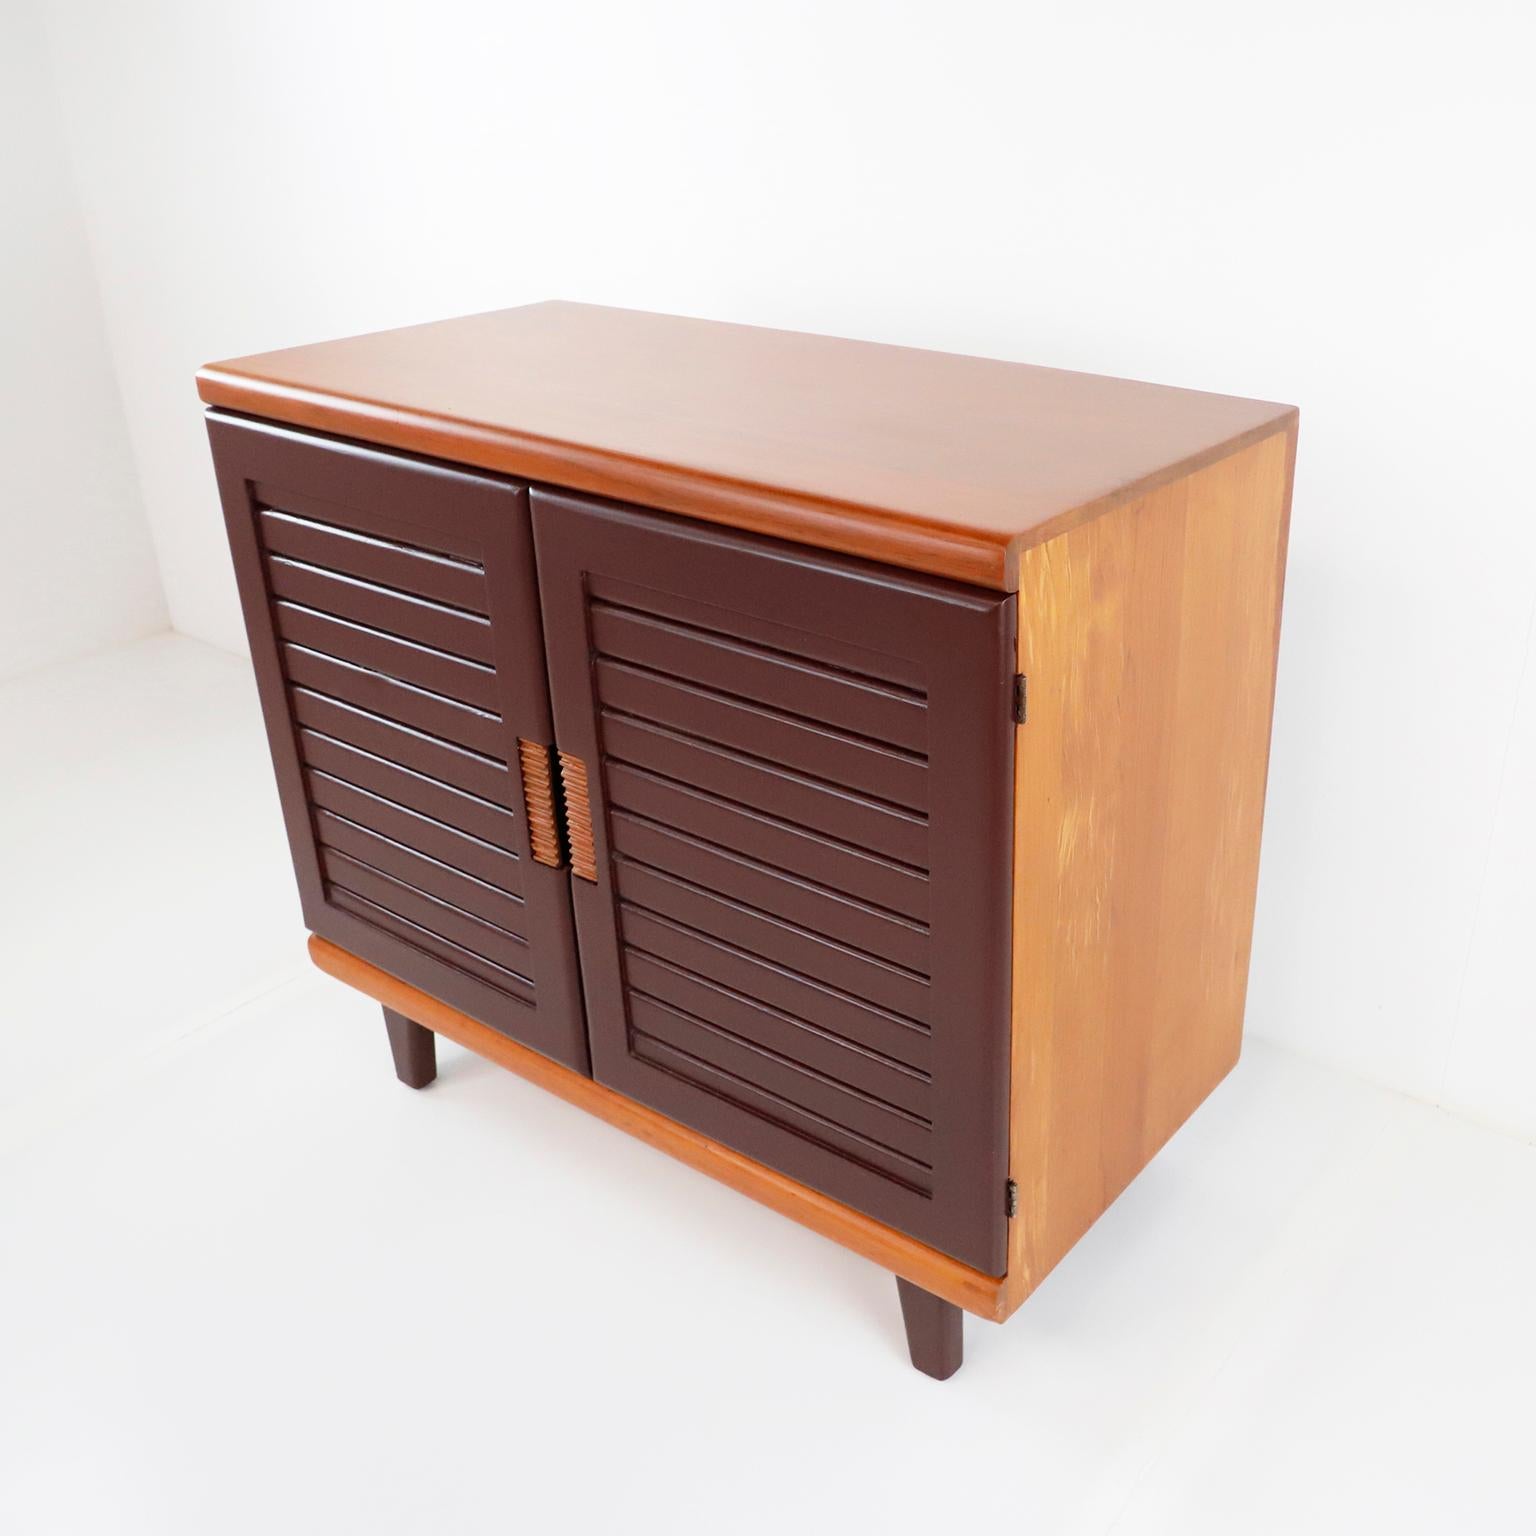 We offer this rare original Domus Credenza by Michael Van Beuren in pine wood and with the characteristic Van Beuren color, designed by the American Bauhaus designer, Michael Van Beuren in Mexico, circa 1950, this handmade, solid pine and was